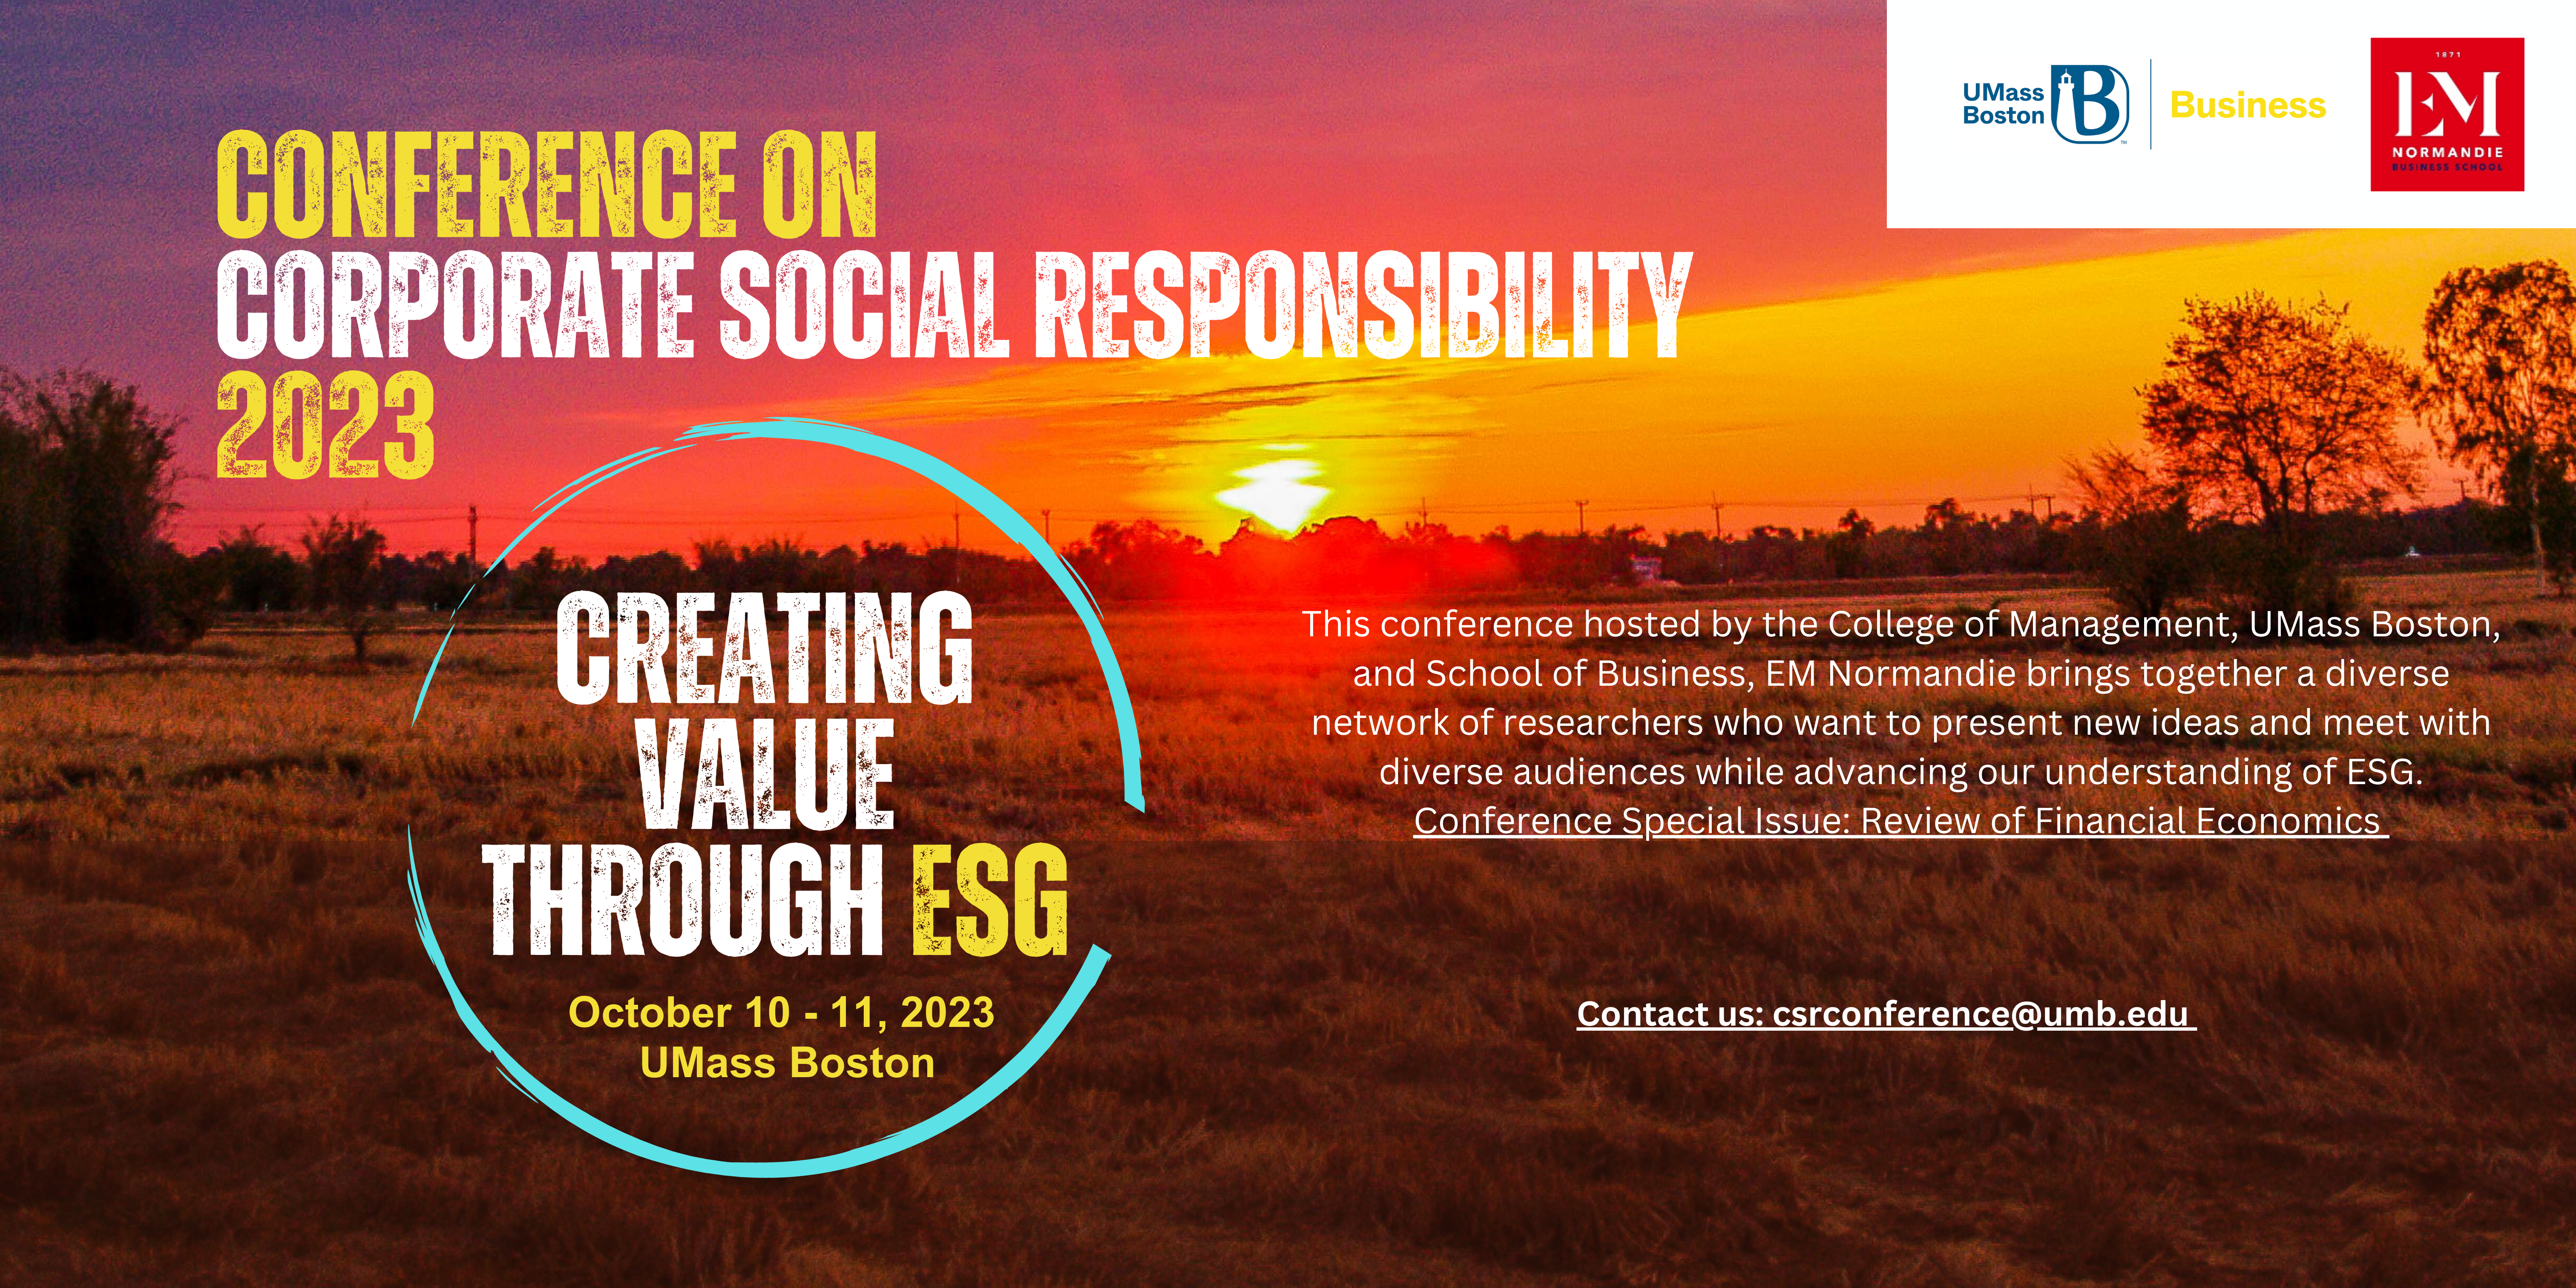 Conference on Corporate Social Responsibility